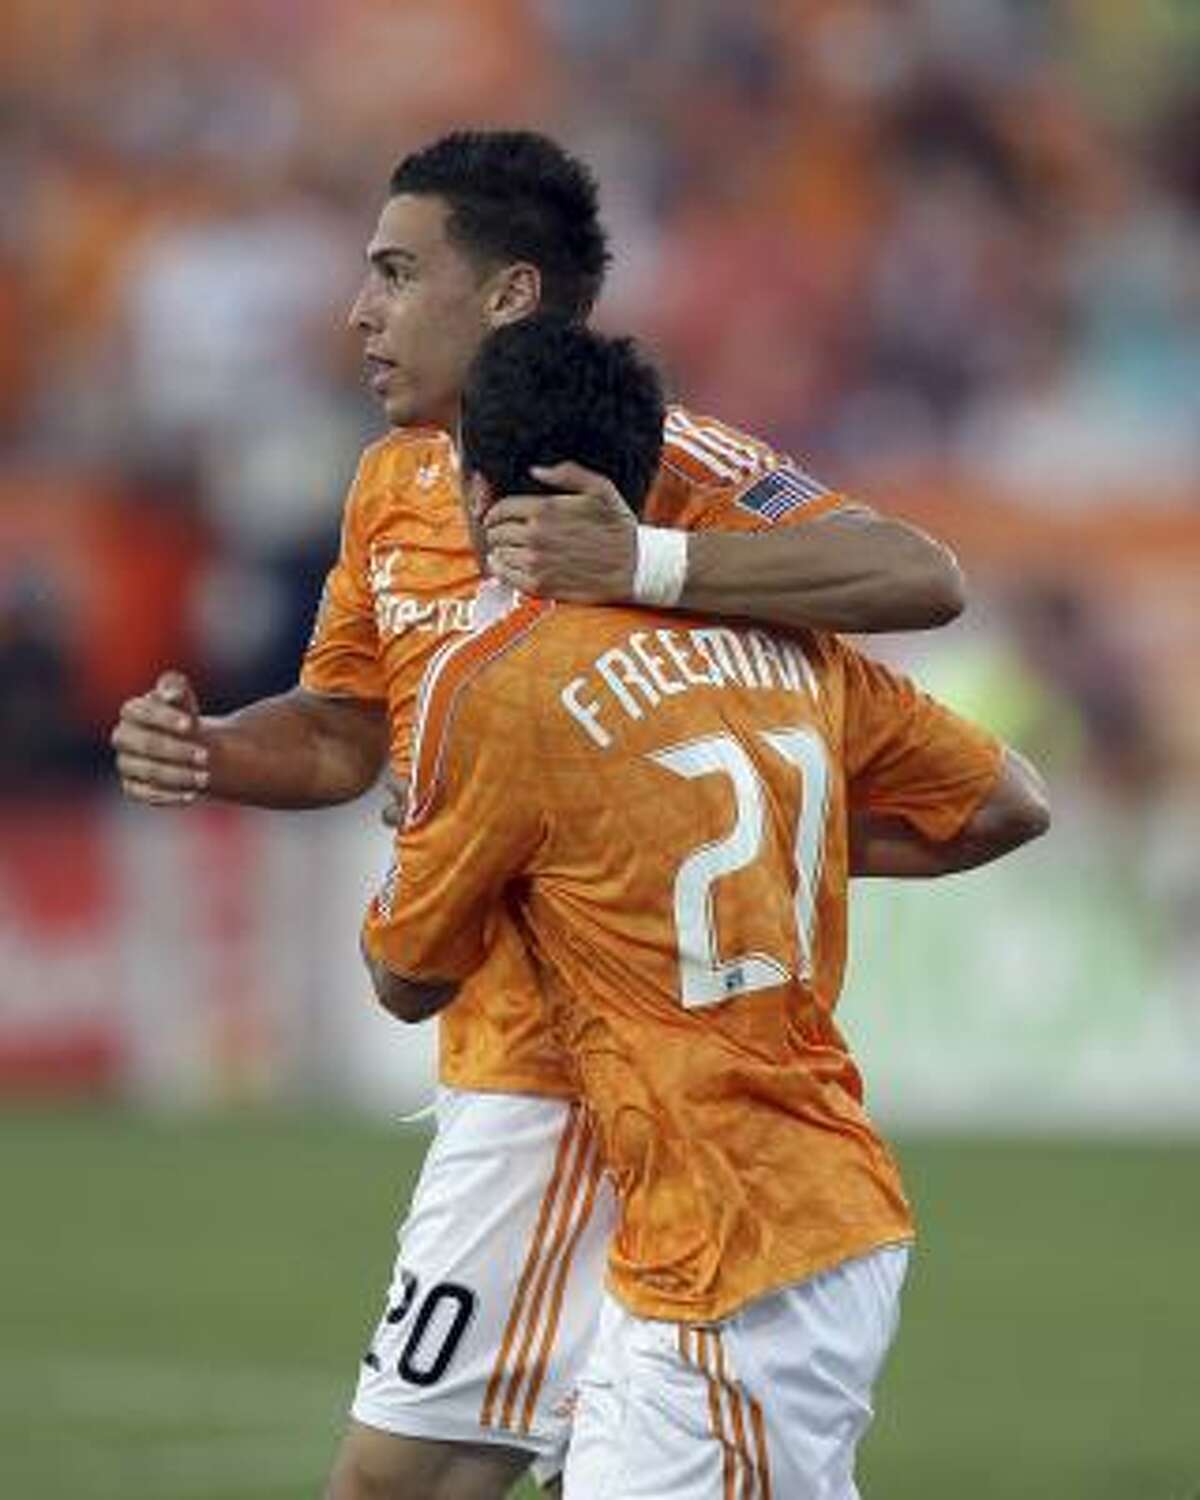 Dynamo players Geoff Cameron, left, and Hunter Freeman celebrate after a goal in the first half on Saturday.